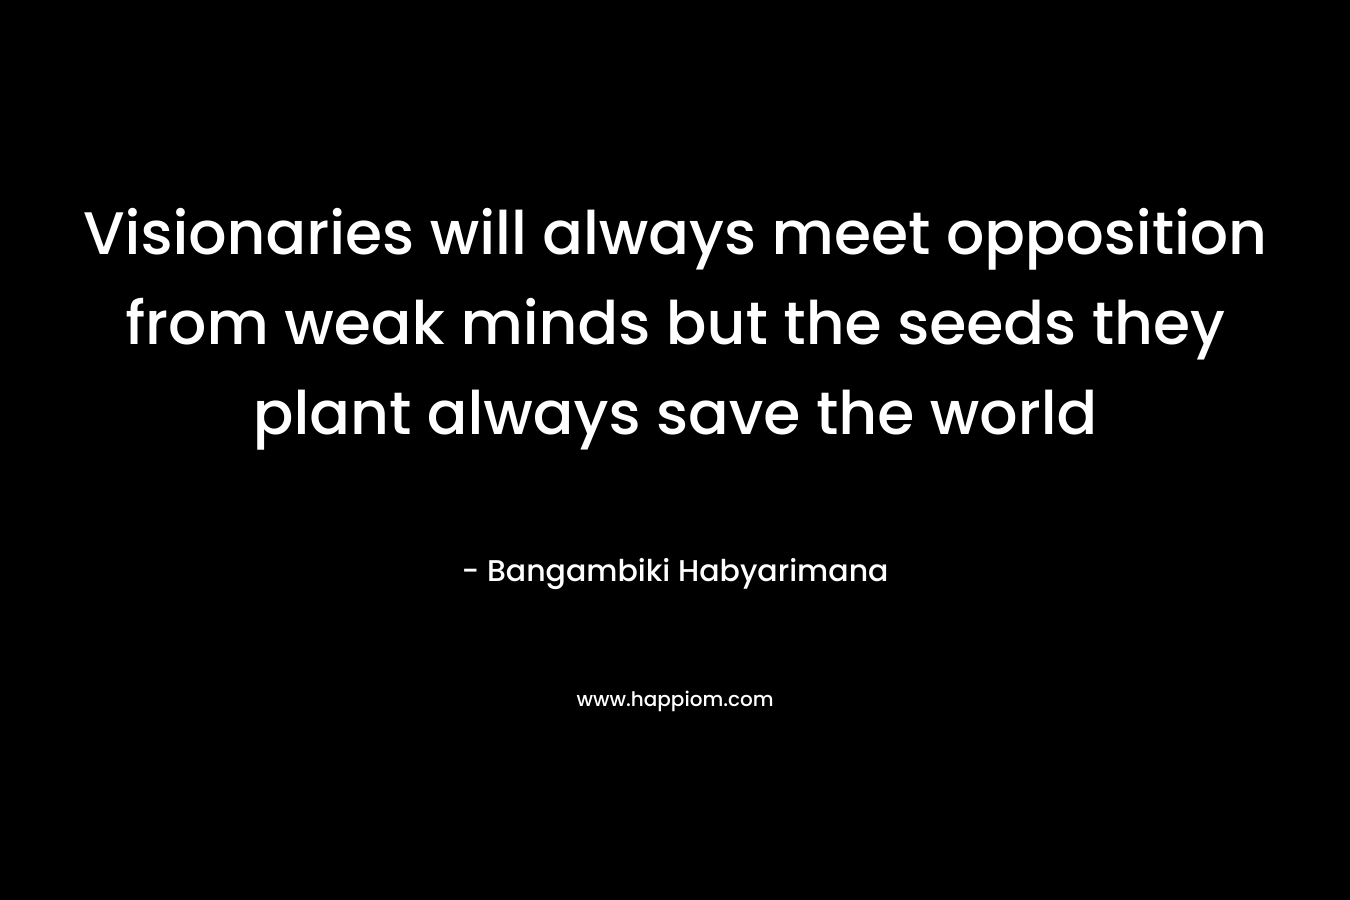 Visionaries will always meet opposition from weak minds but the seeds they plant always save the world